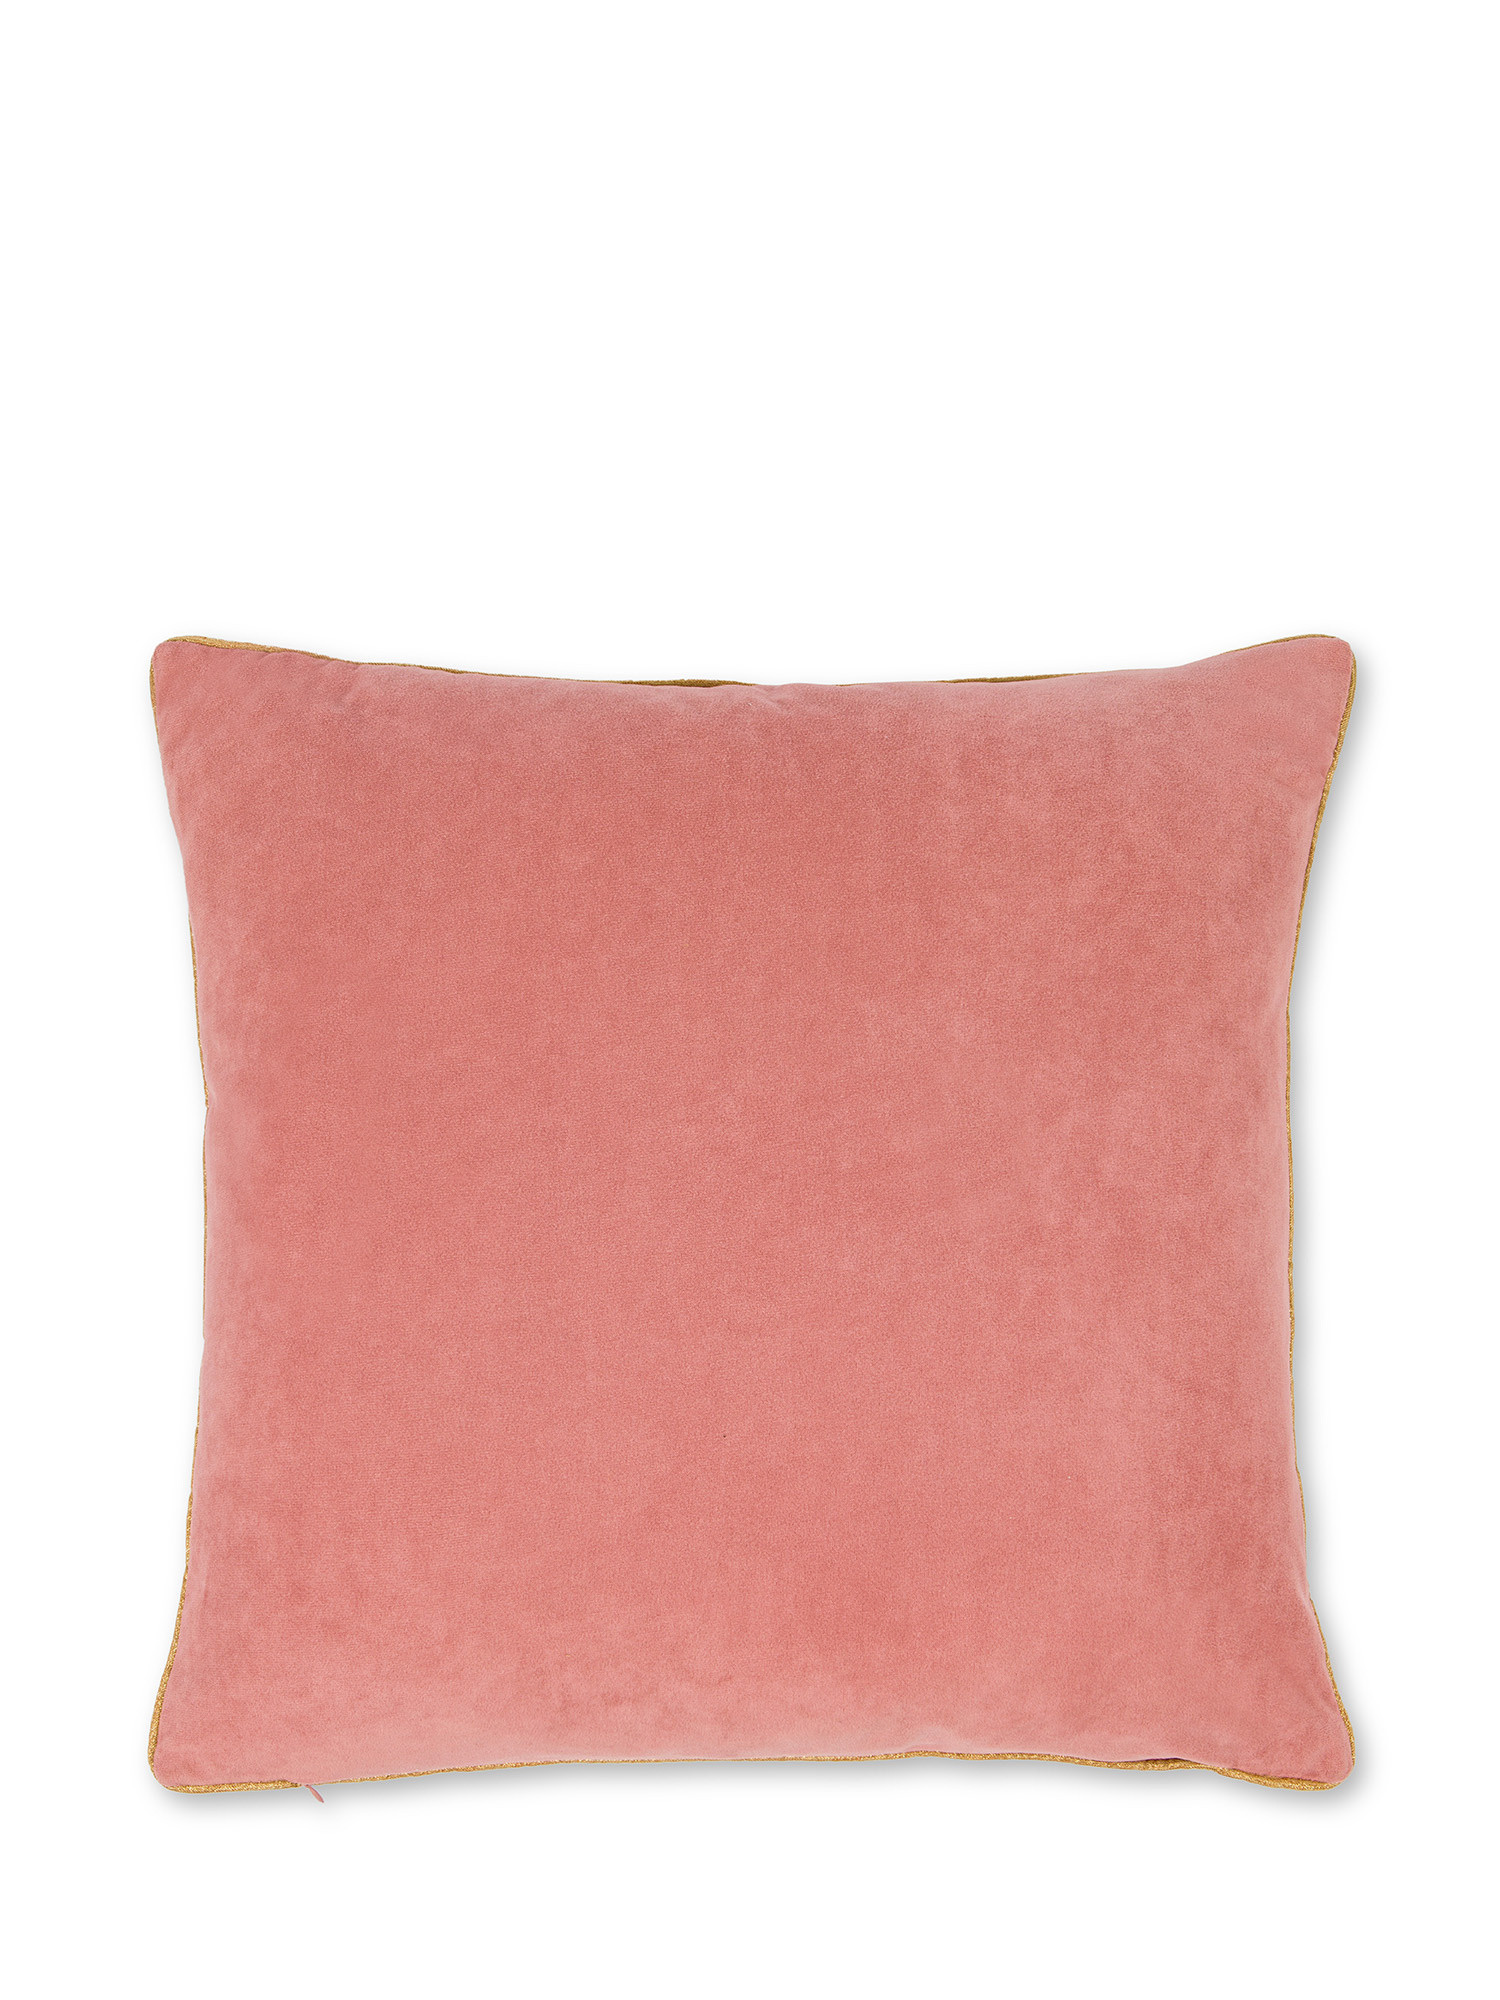 Velvet cushion embroidered with piping 45X45cm, Pink, large image number 1